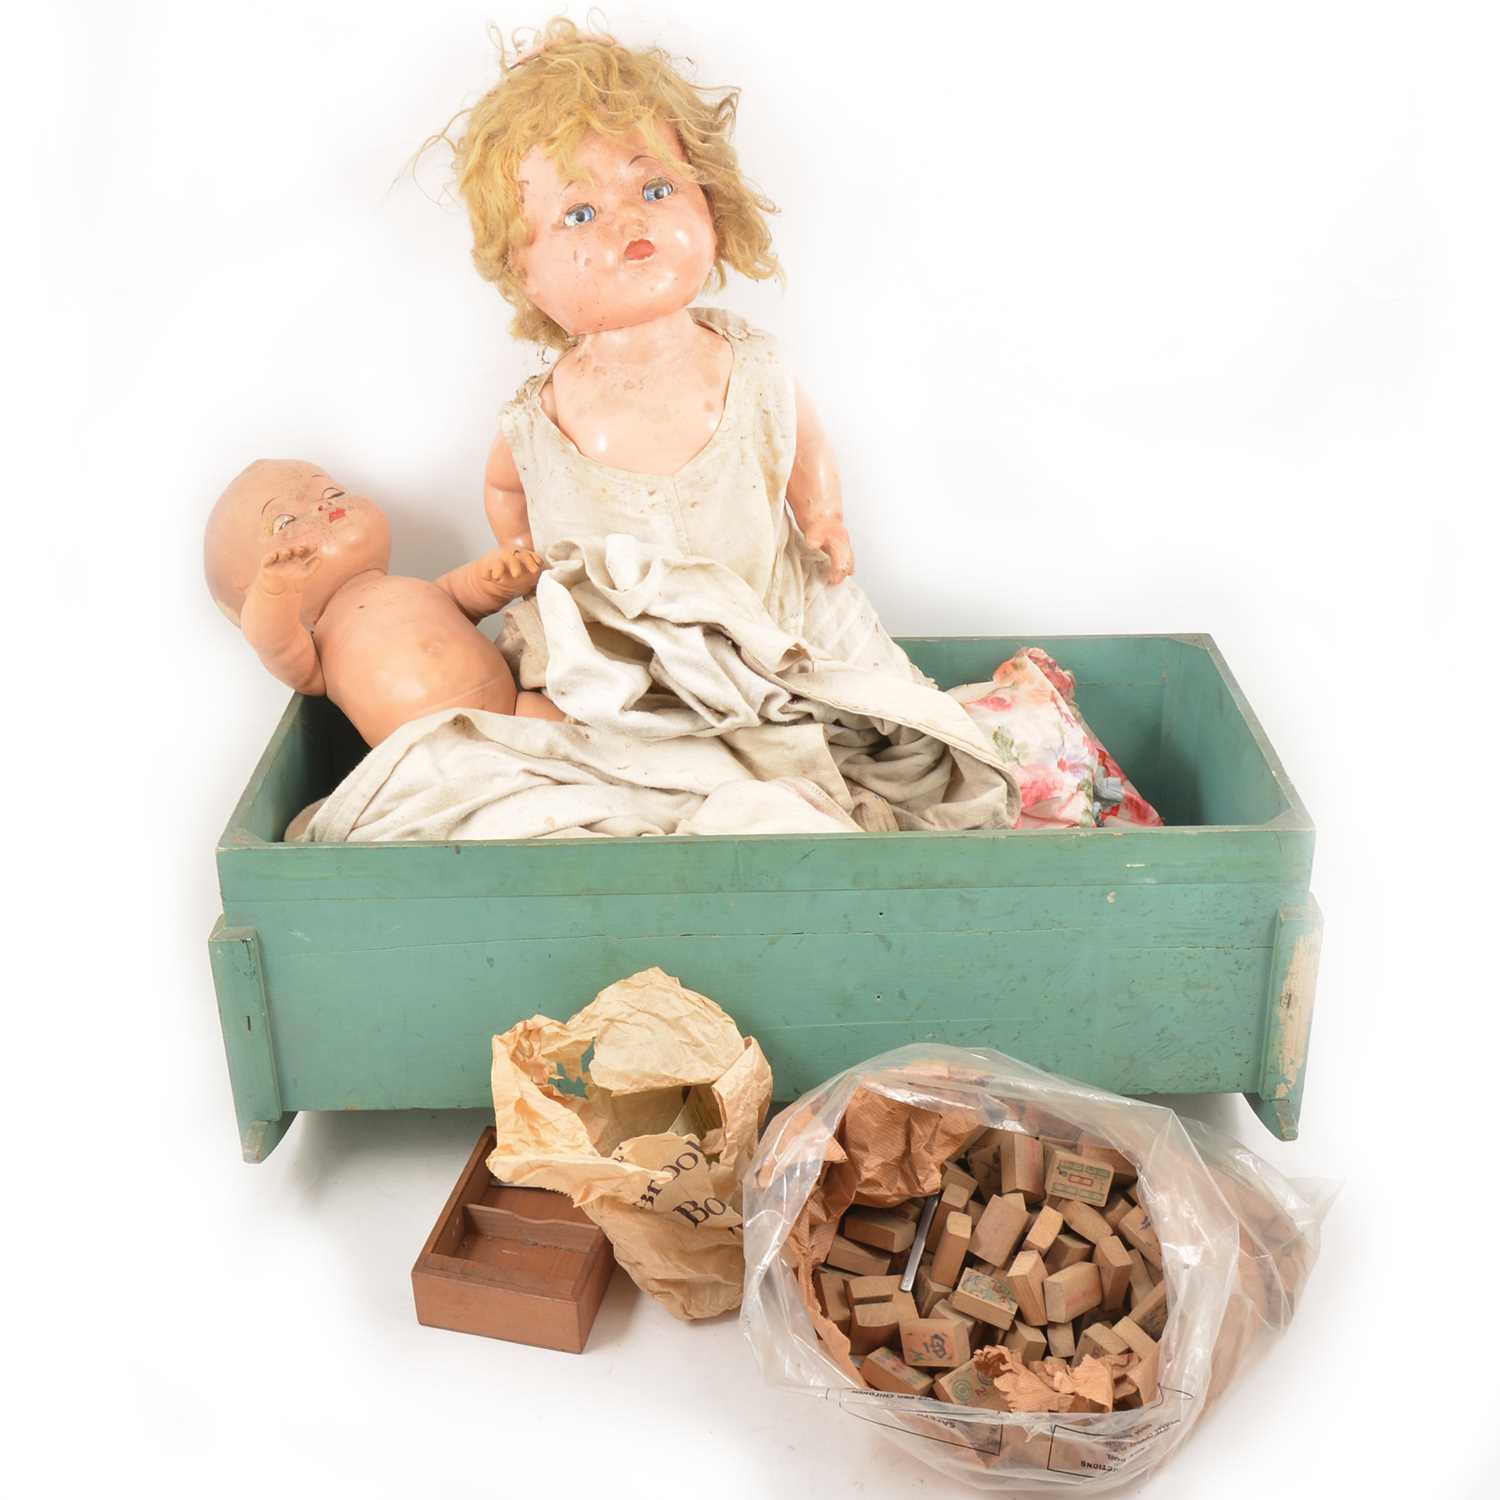 Lot 133 - Two composition head dolls, wooden crib, Mahjong set, and a selection of vintage tennis rackets